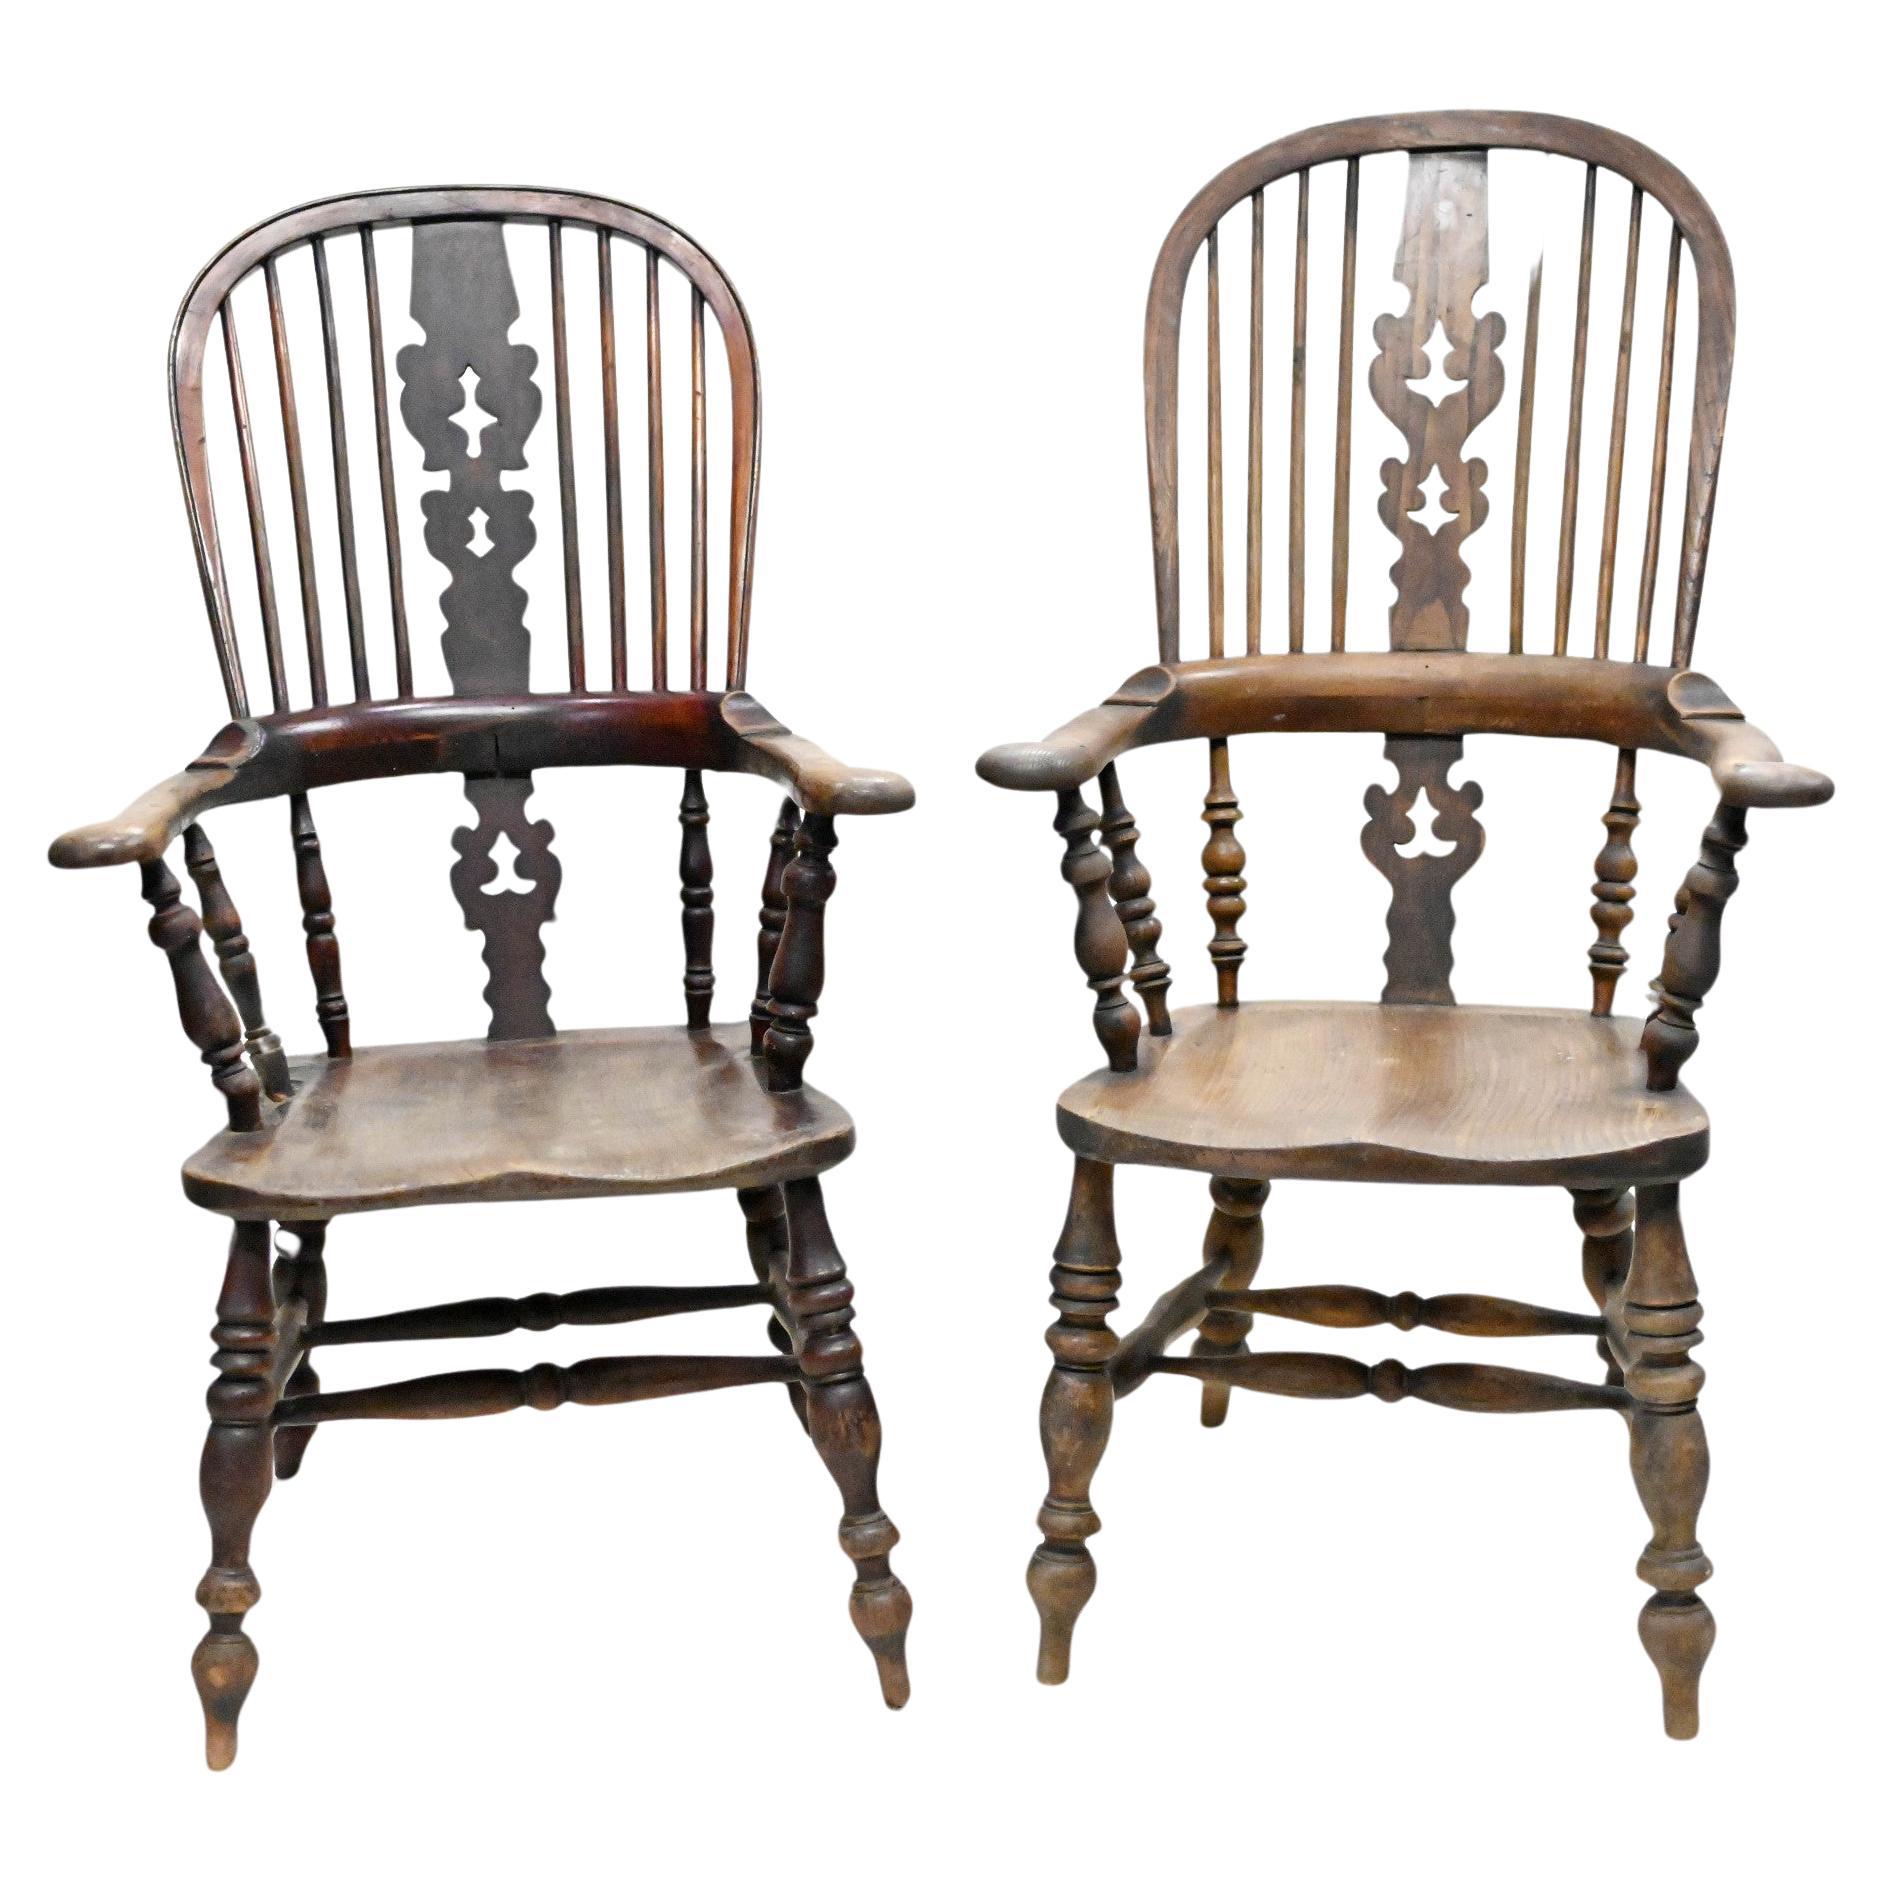 Windsor-Sessel aus Eiche, His and Hers, 1860, Paar